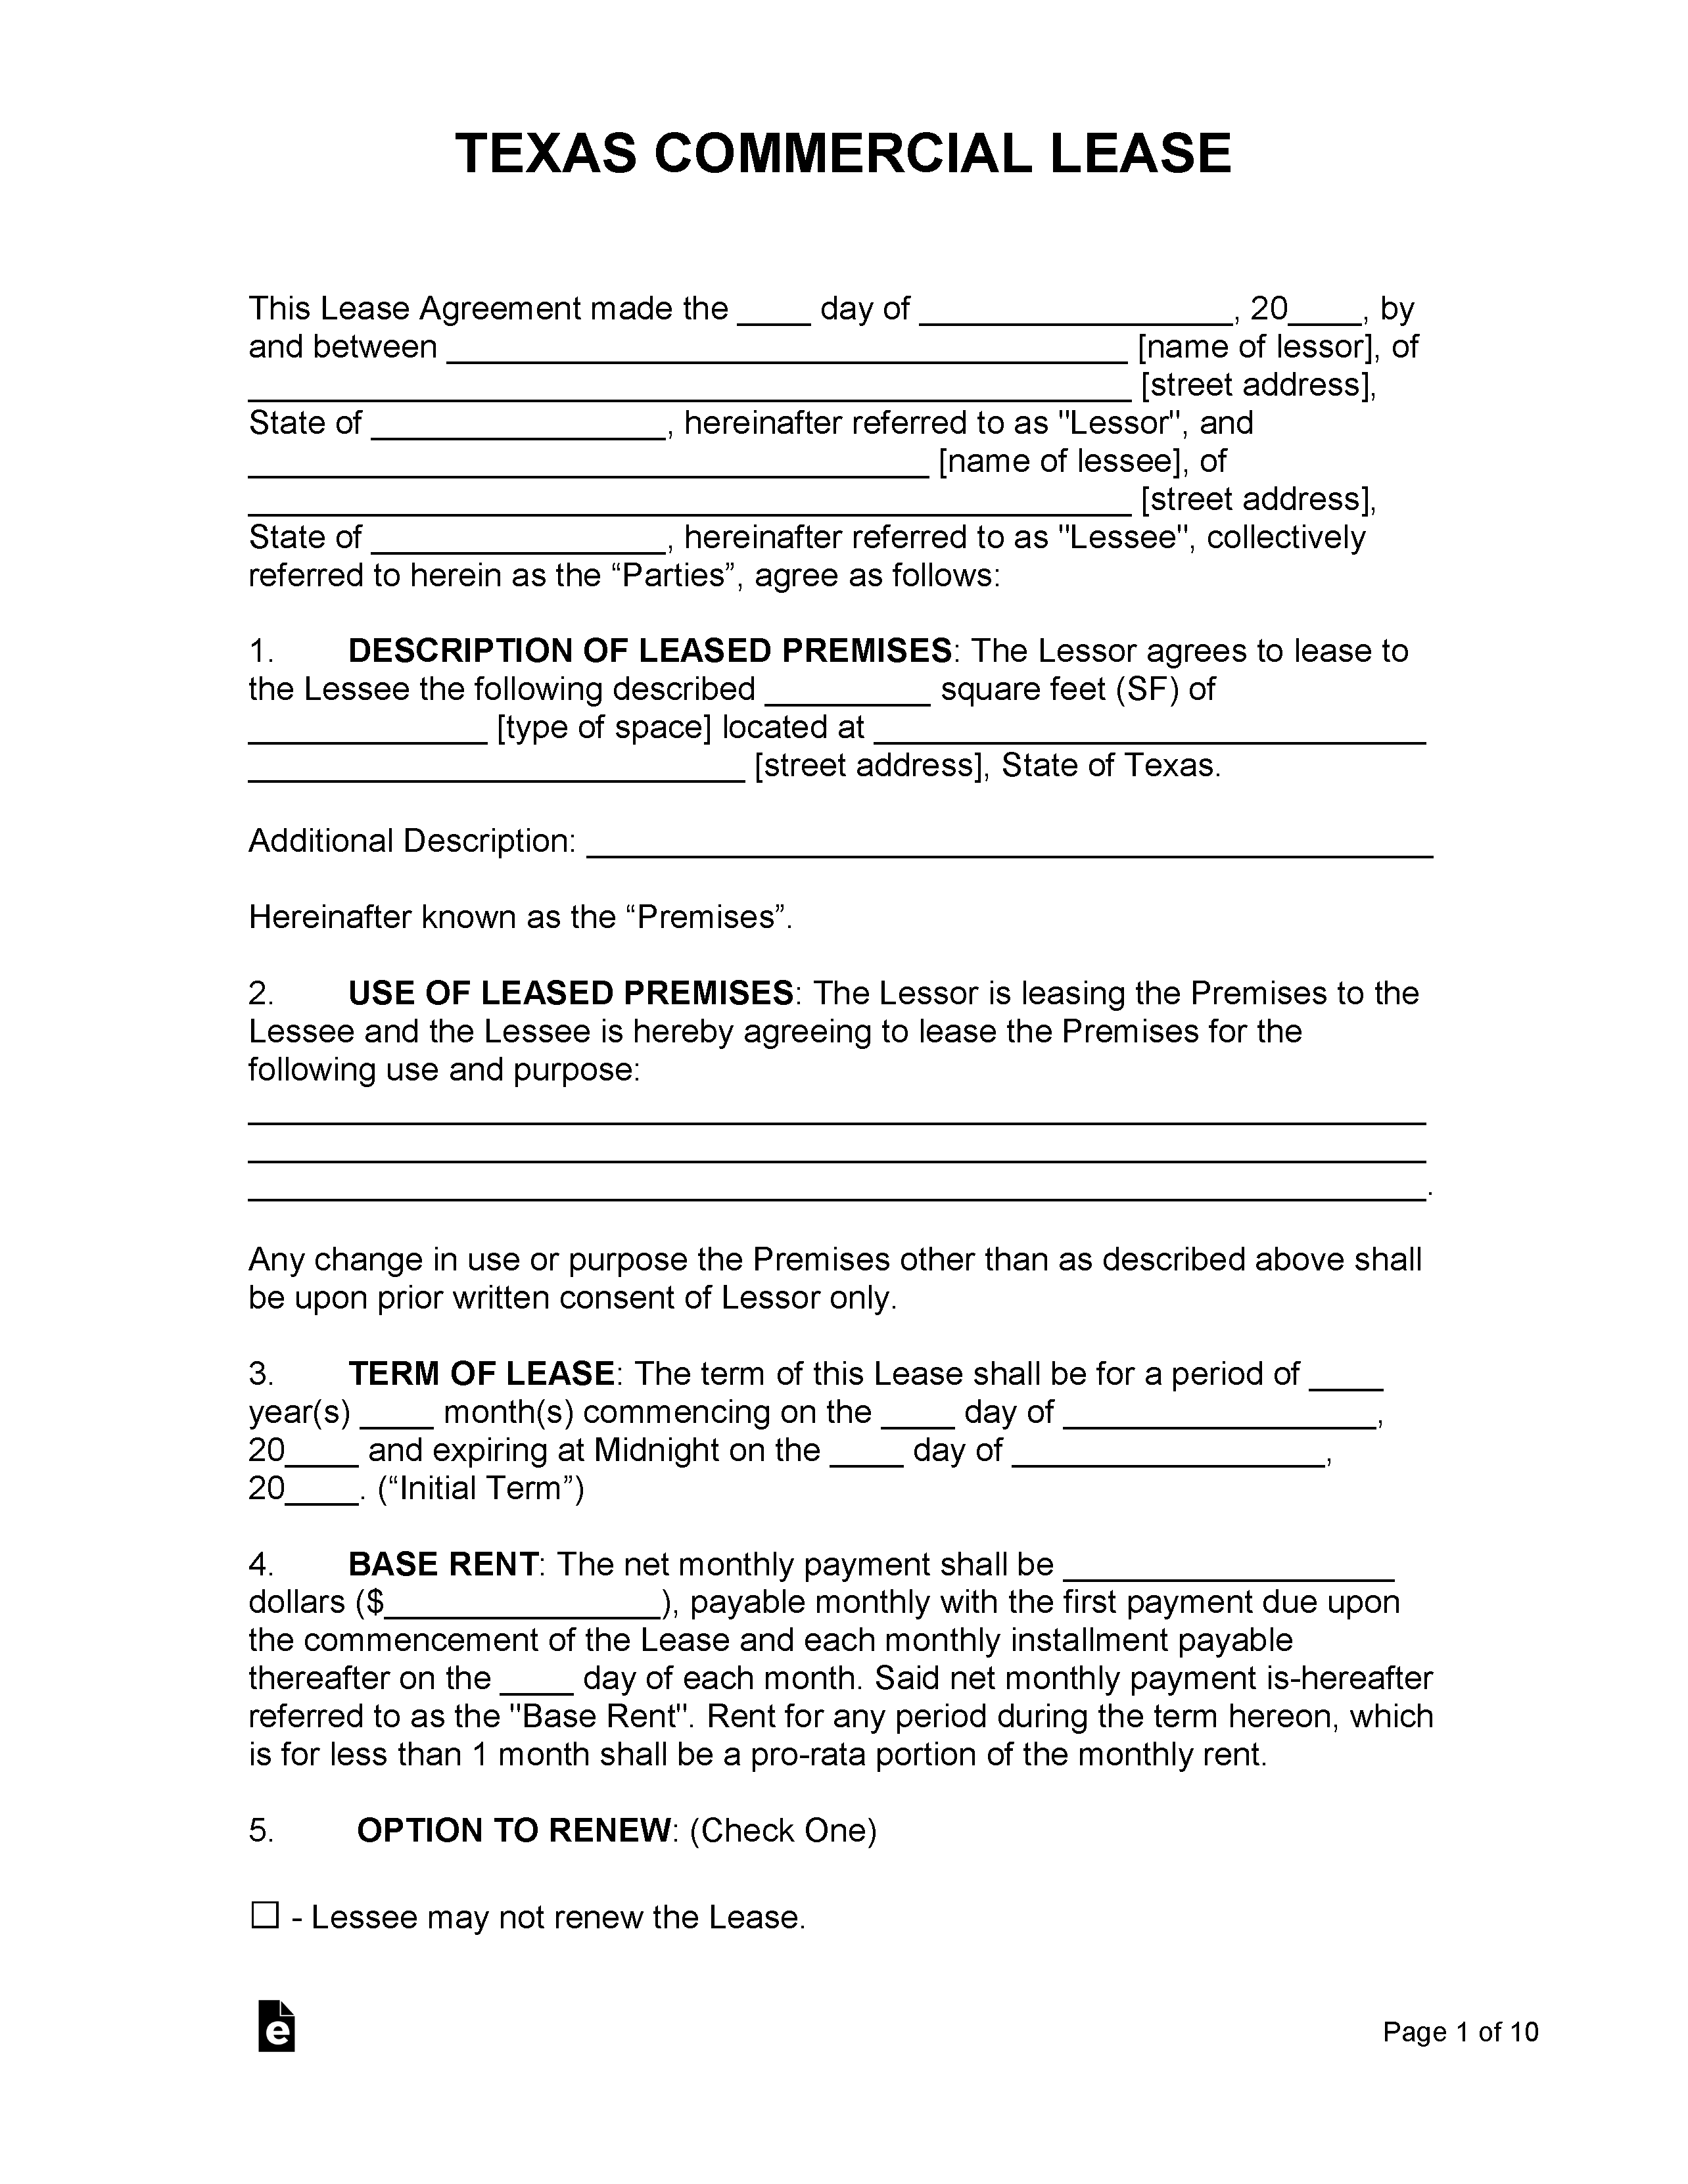 texas-commercial-lease-agreement-template